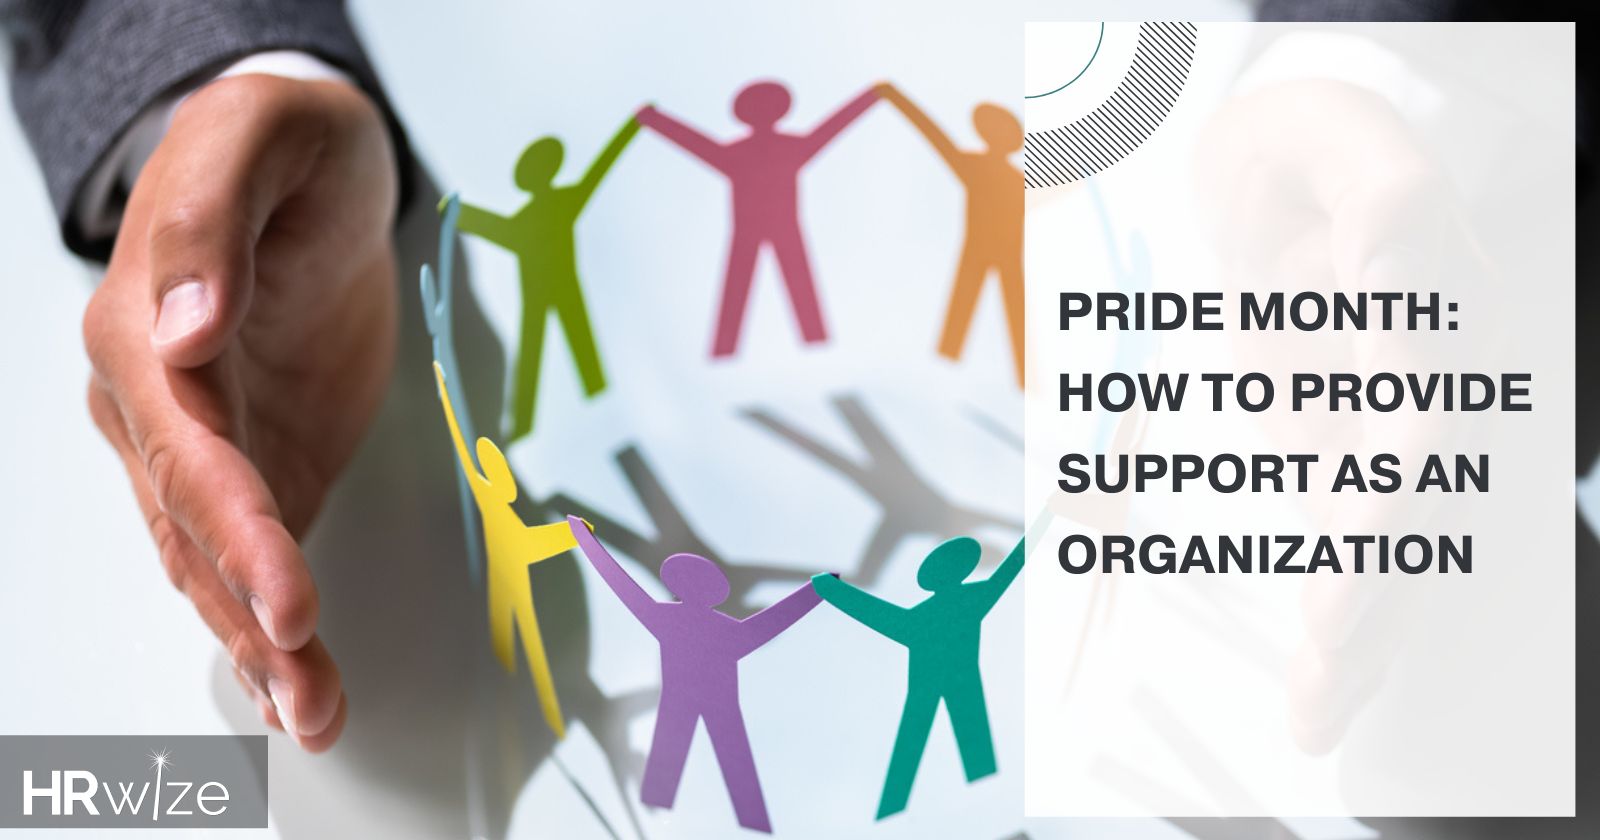 Pride Month: How to provide support as an organization